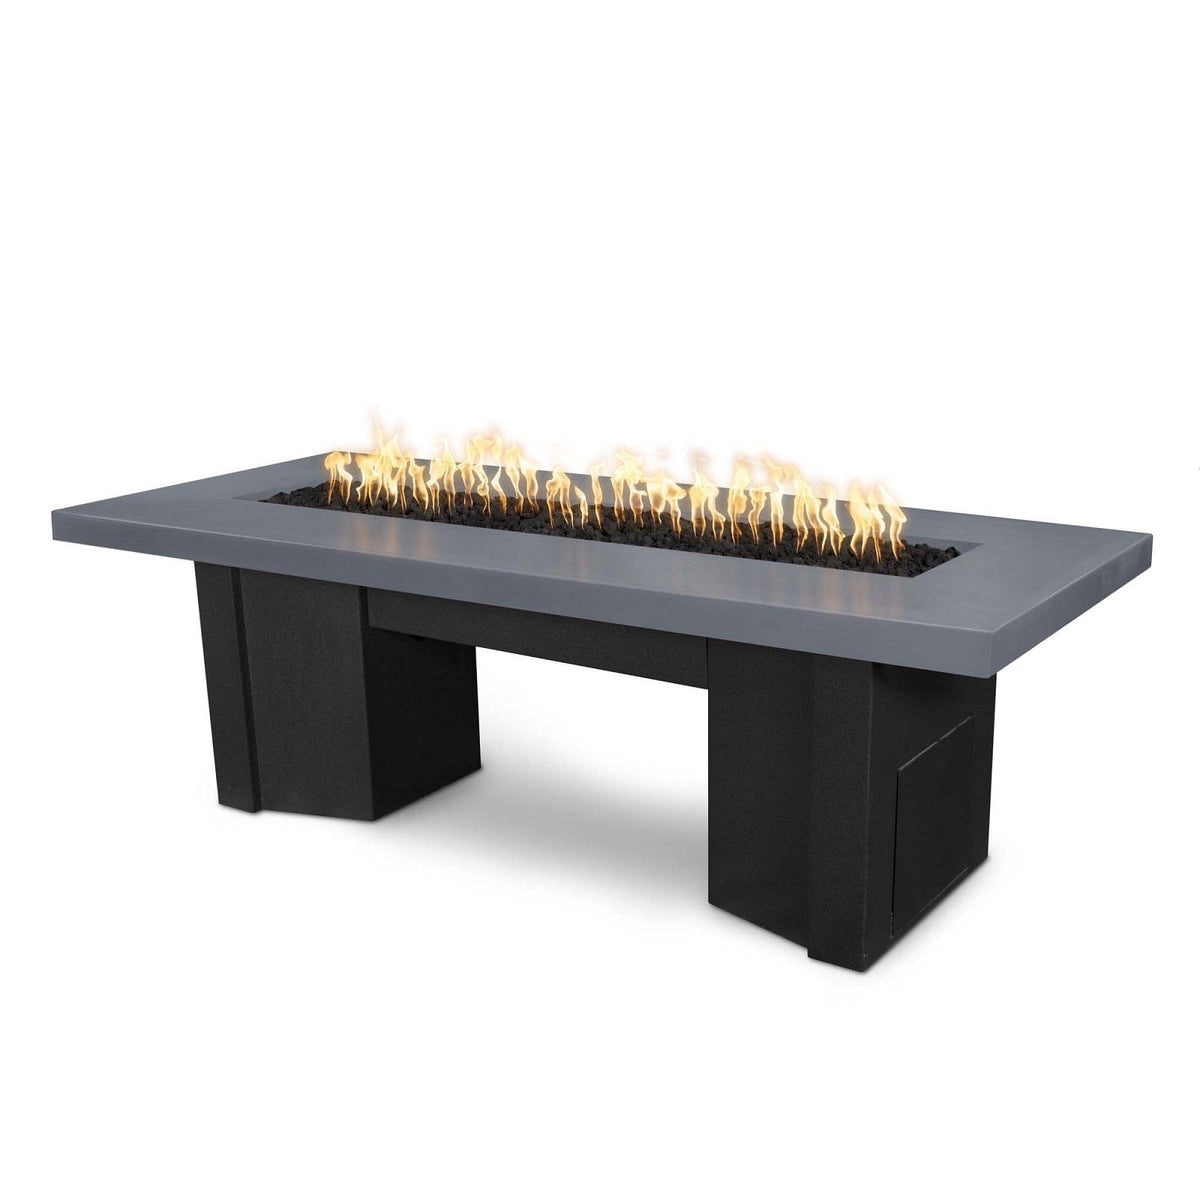 The Outdoor Plus Fire Features Gray (-GRY) / Black Powder Coated Steel (-BLK) The Outdoor Plus 78&quot; Alameda Fire Table Smooth Concrete in Liquid Propane - 110V Plug &amp; Play Electronic Ignition / OPT-ALMGFRC78EKIT-LP